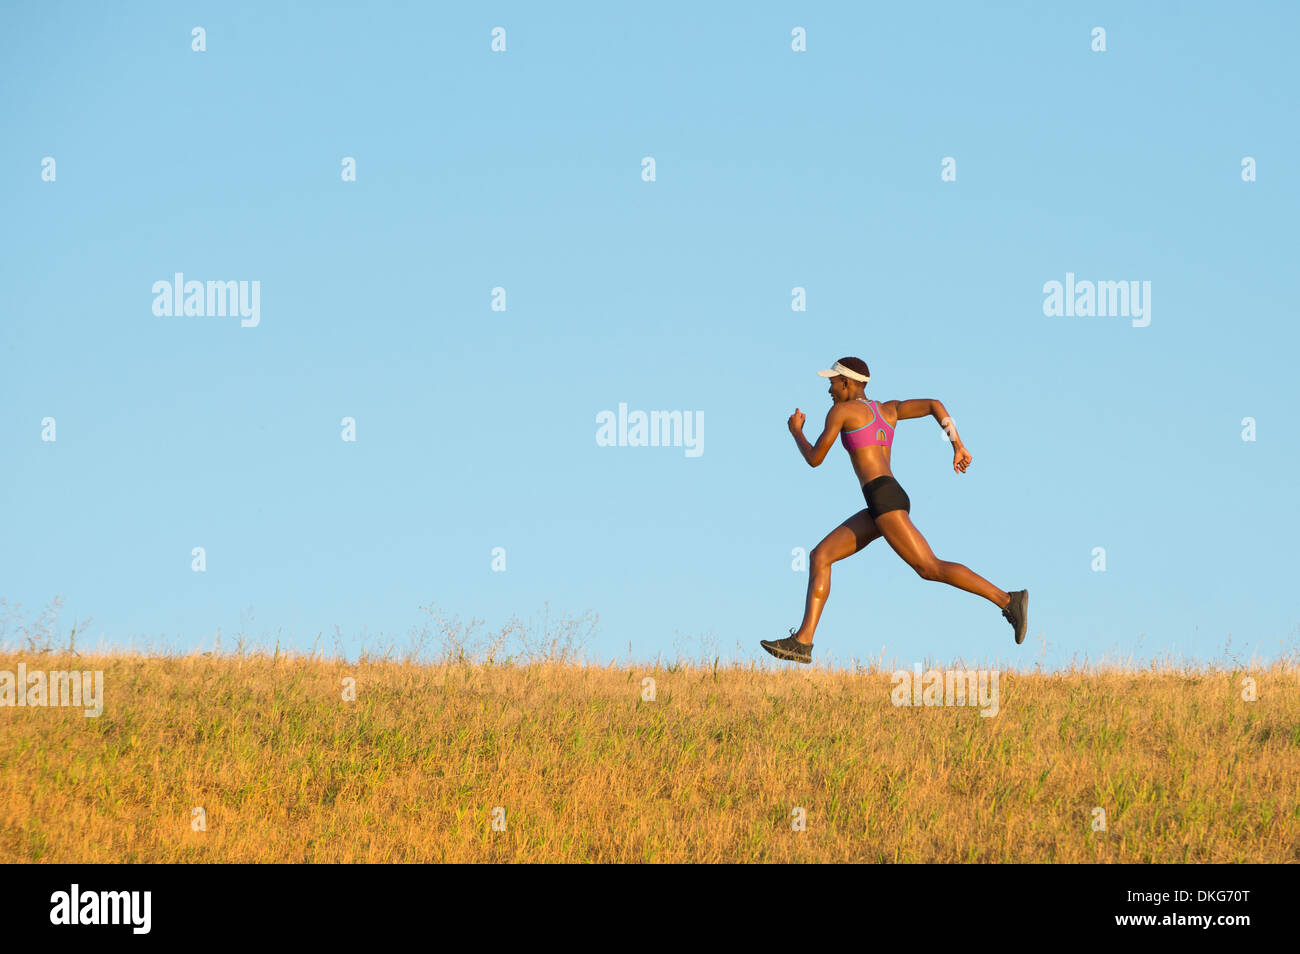 Young woman running across field Stock Photo